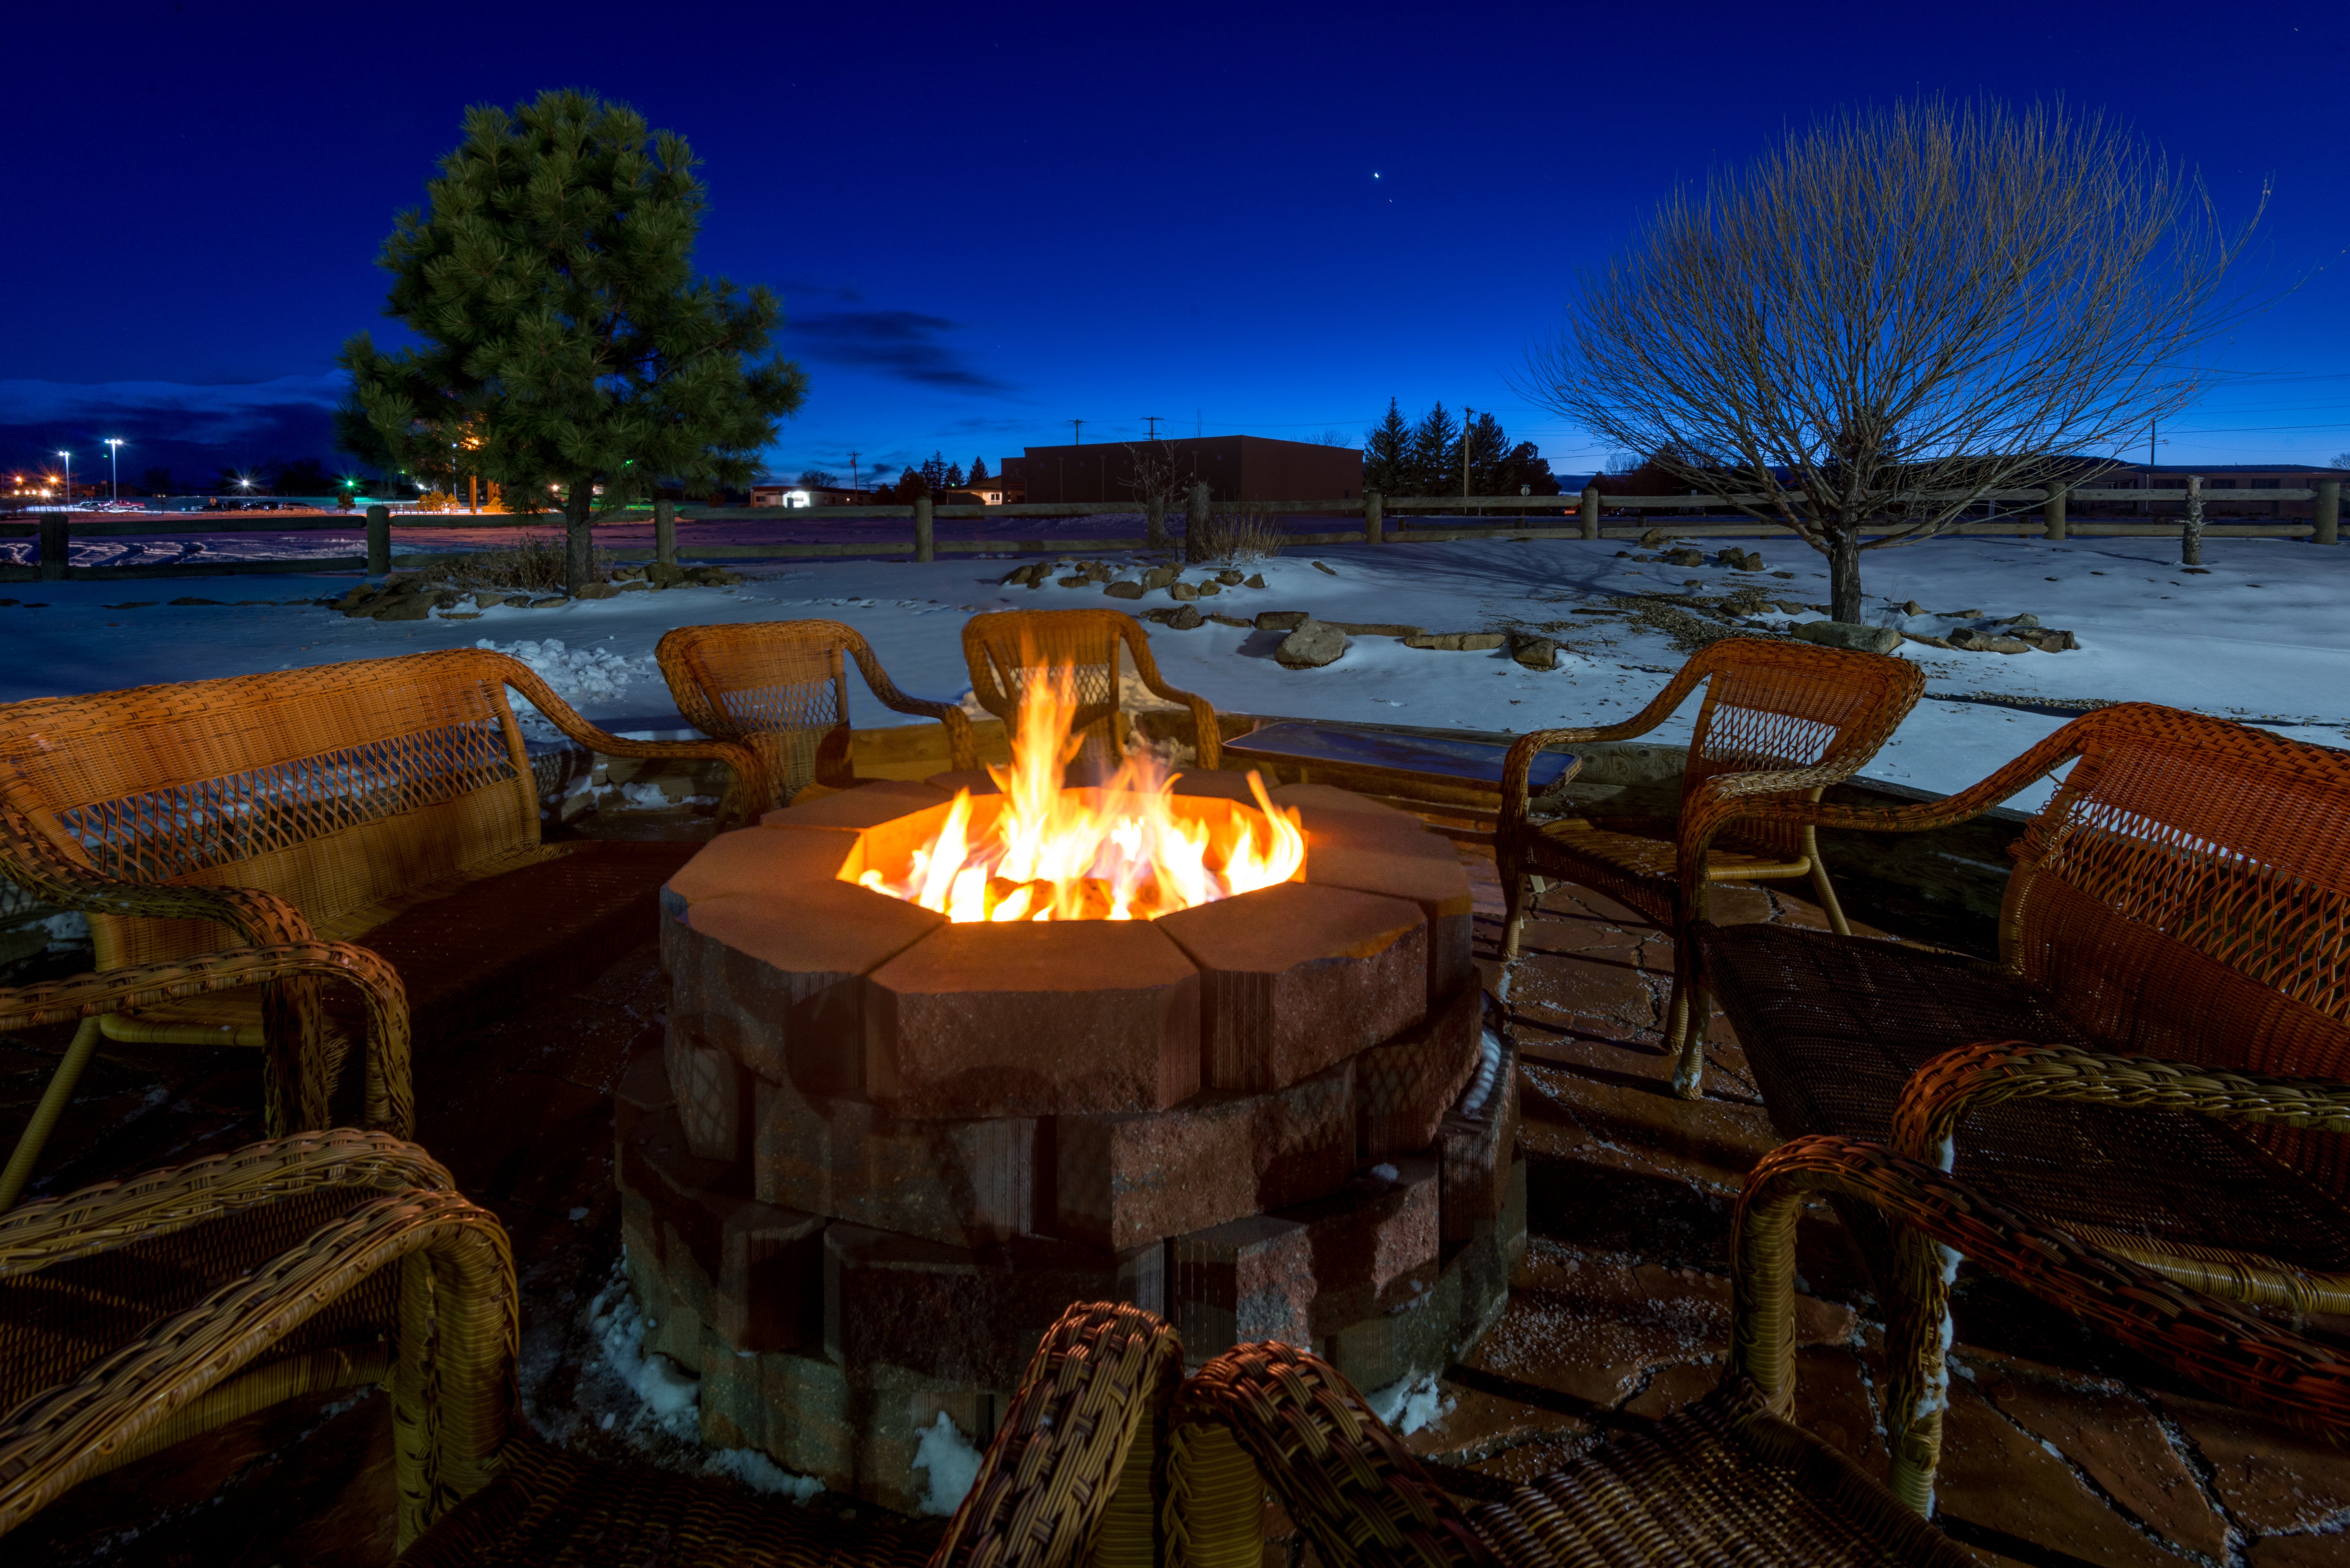 Enjoy the ambiance of our Raton NM patio and firepit